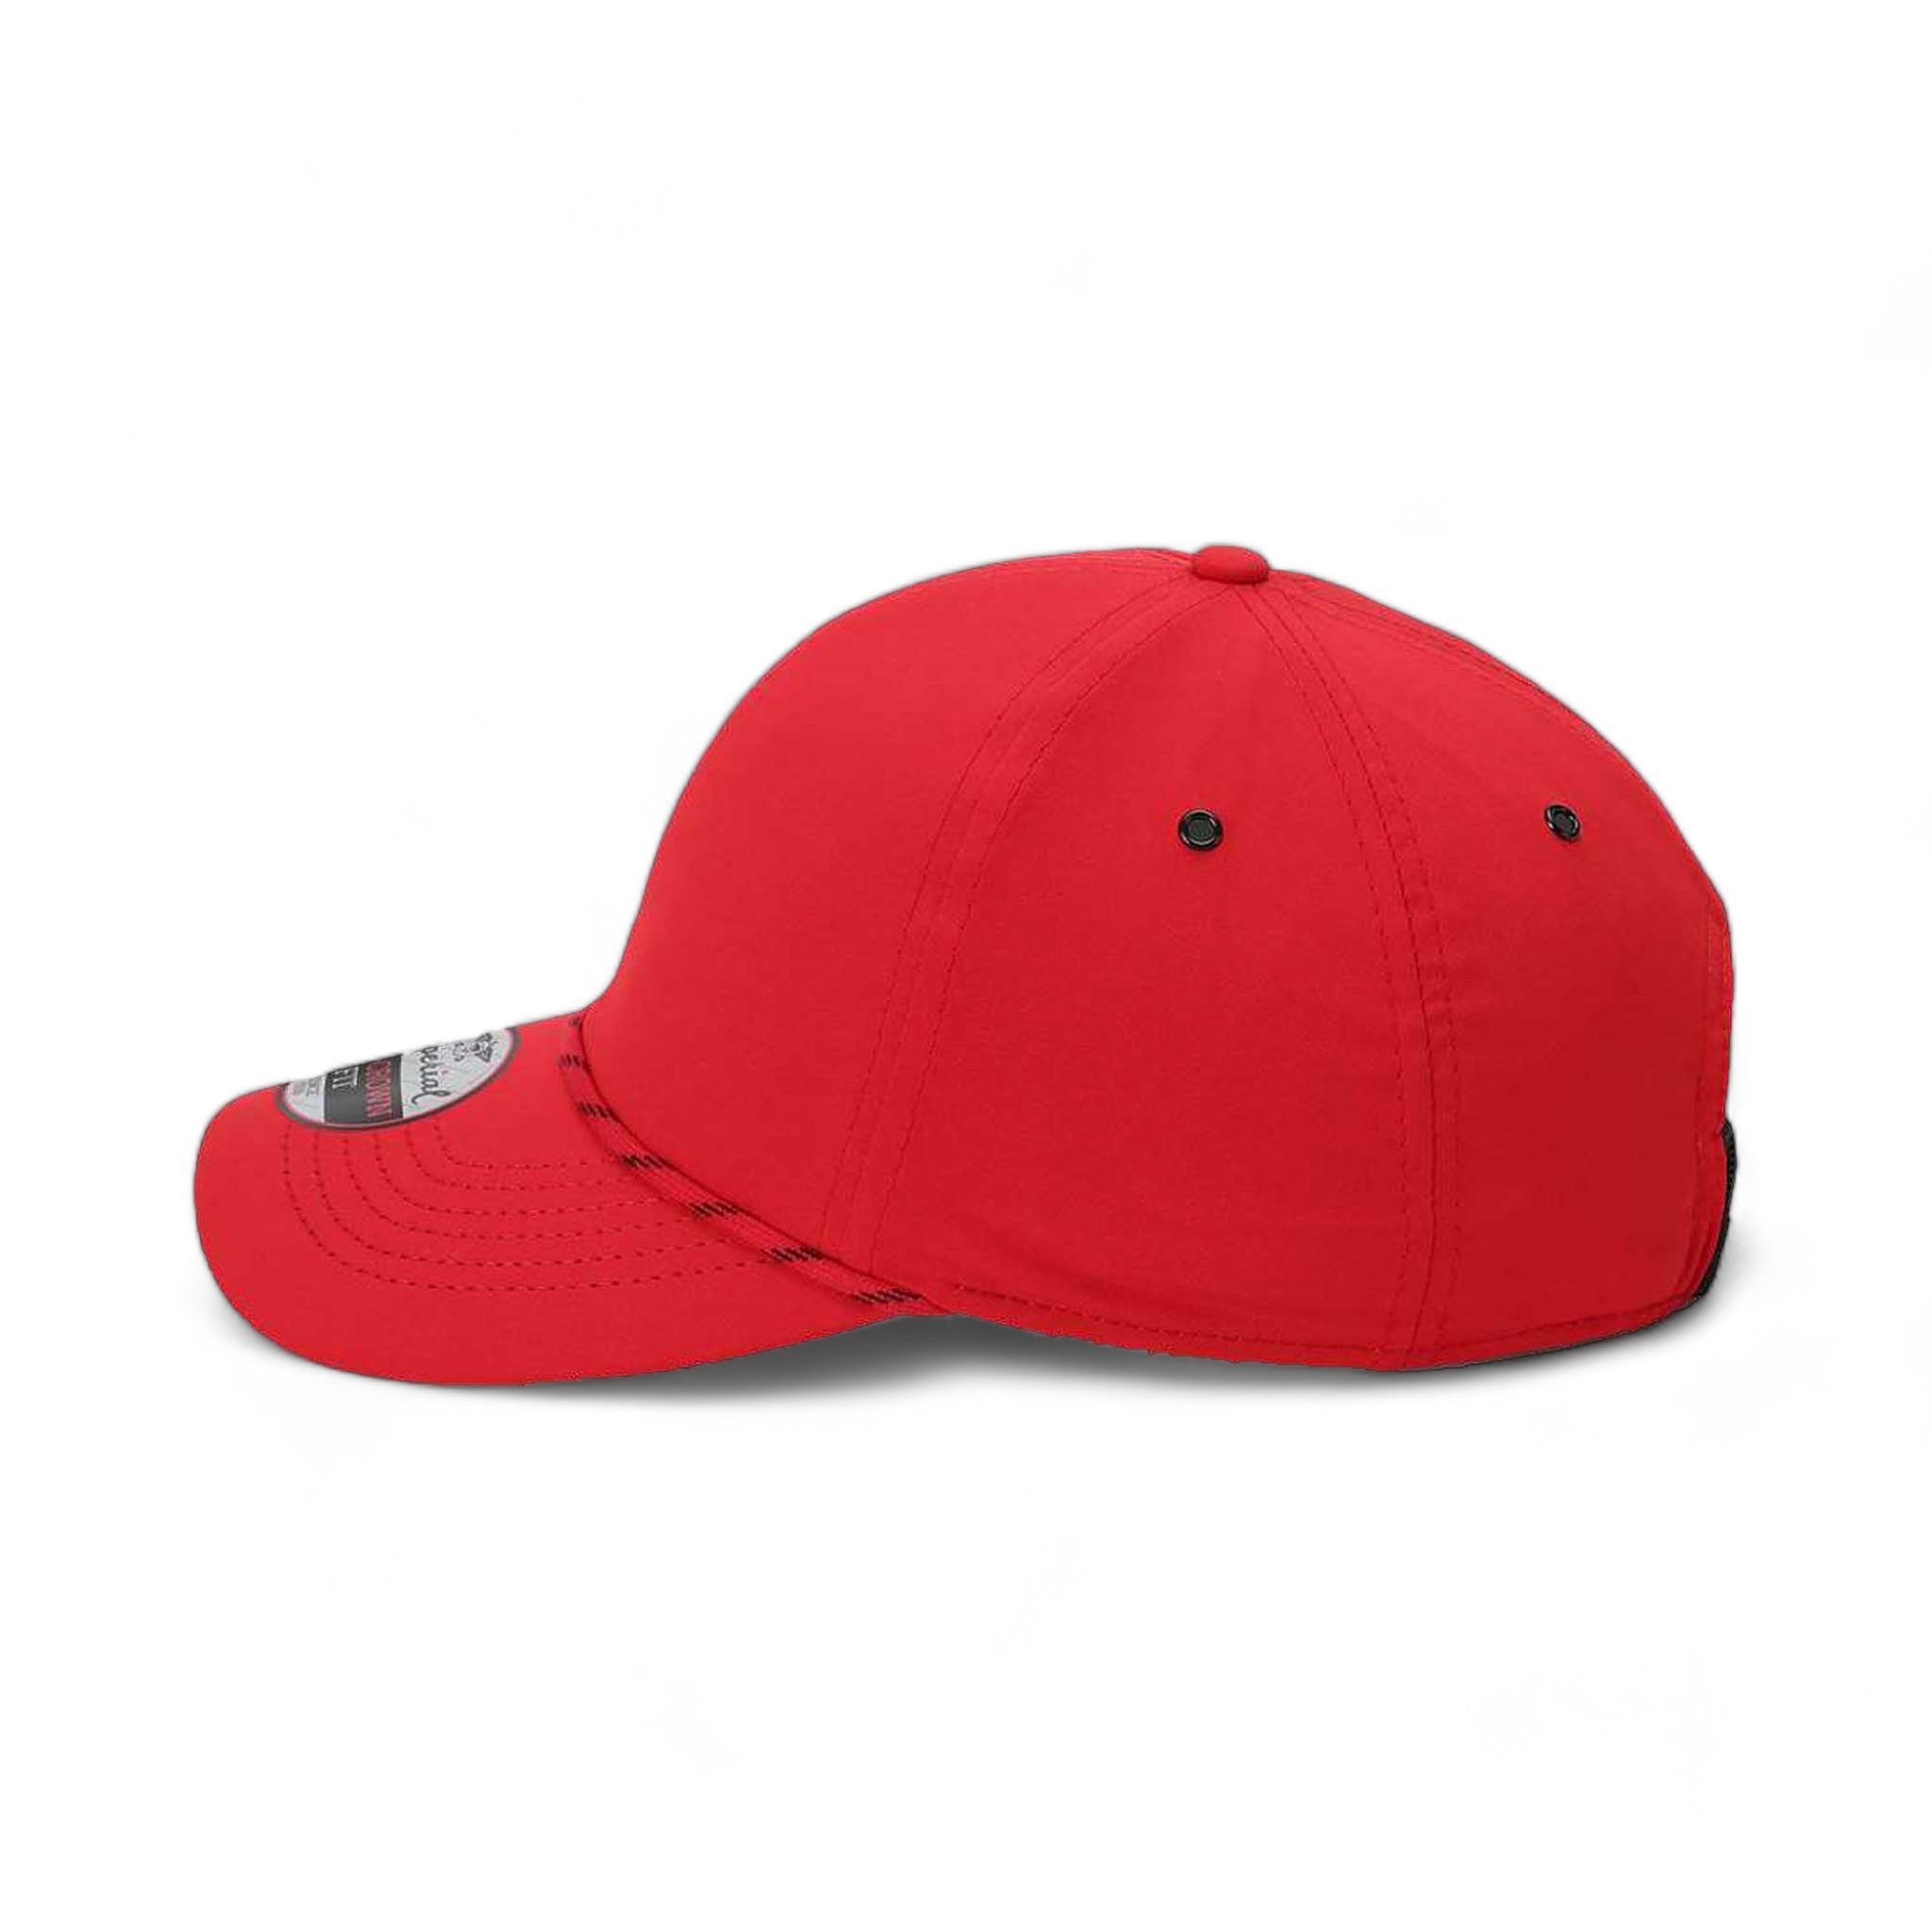 Side view of Imperial 6054 custom hat in red